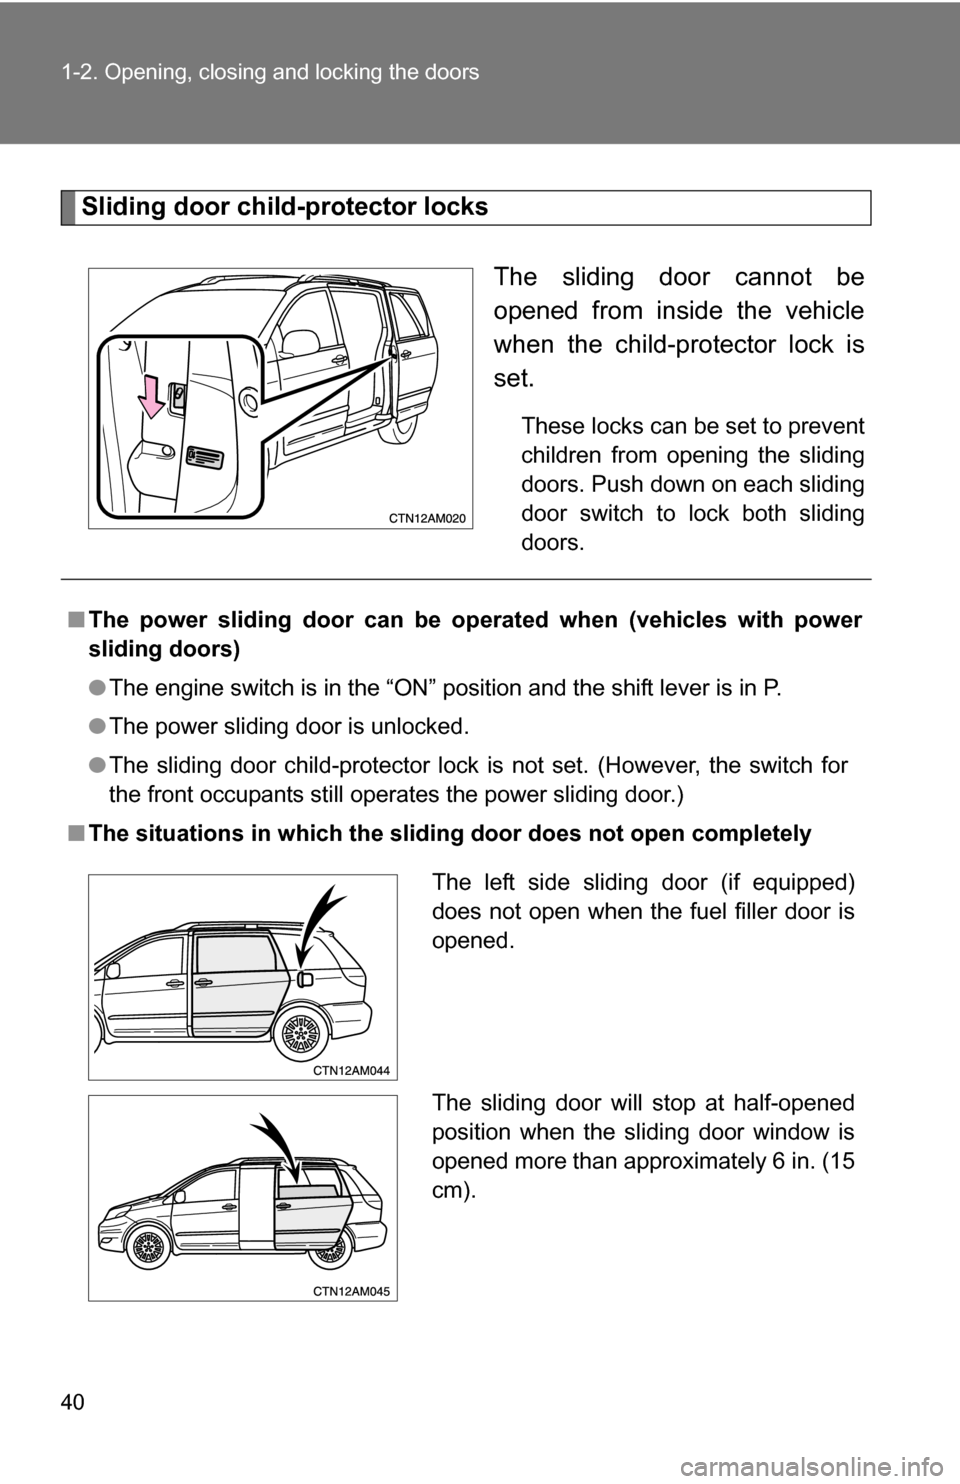 TOYOTA SIENNA 2009 XL20 / 2.G Owners Guide 40 1-2. Opening, closing and locking the doors
Sliding door child-protector locksThe sliding door cannot be
opened from inside the vehicle
when the child-protector lock is
set. 
These locks can be set